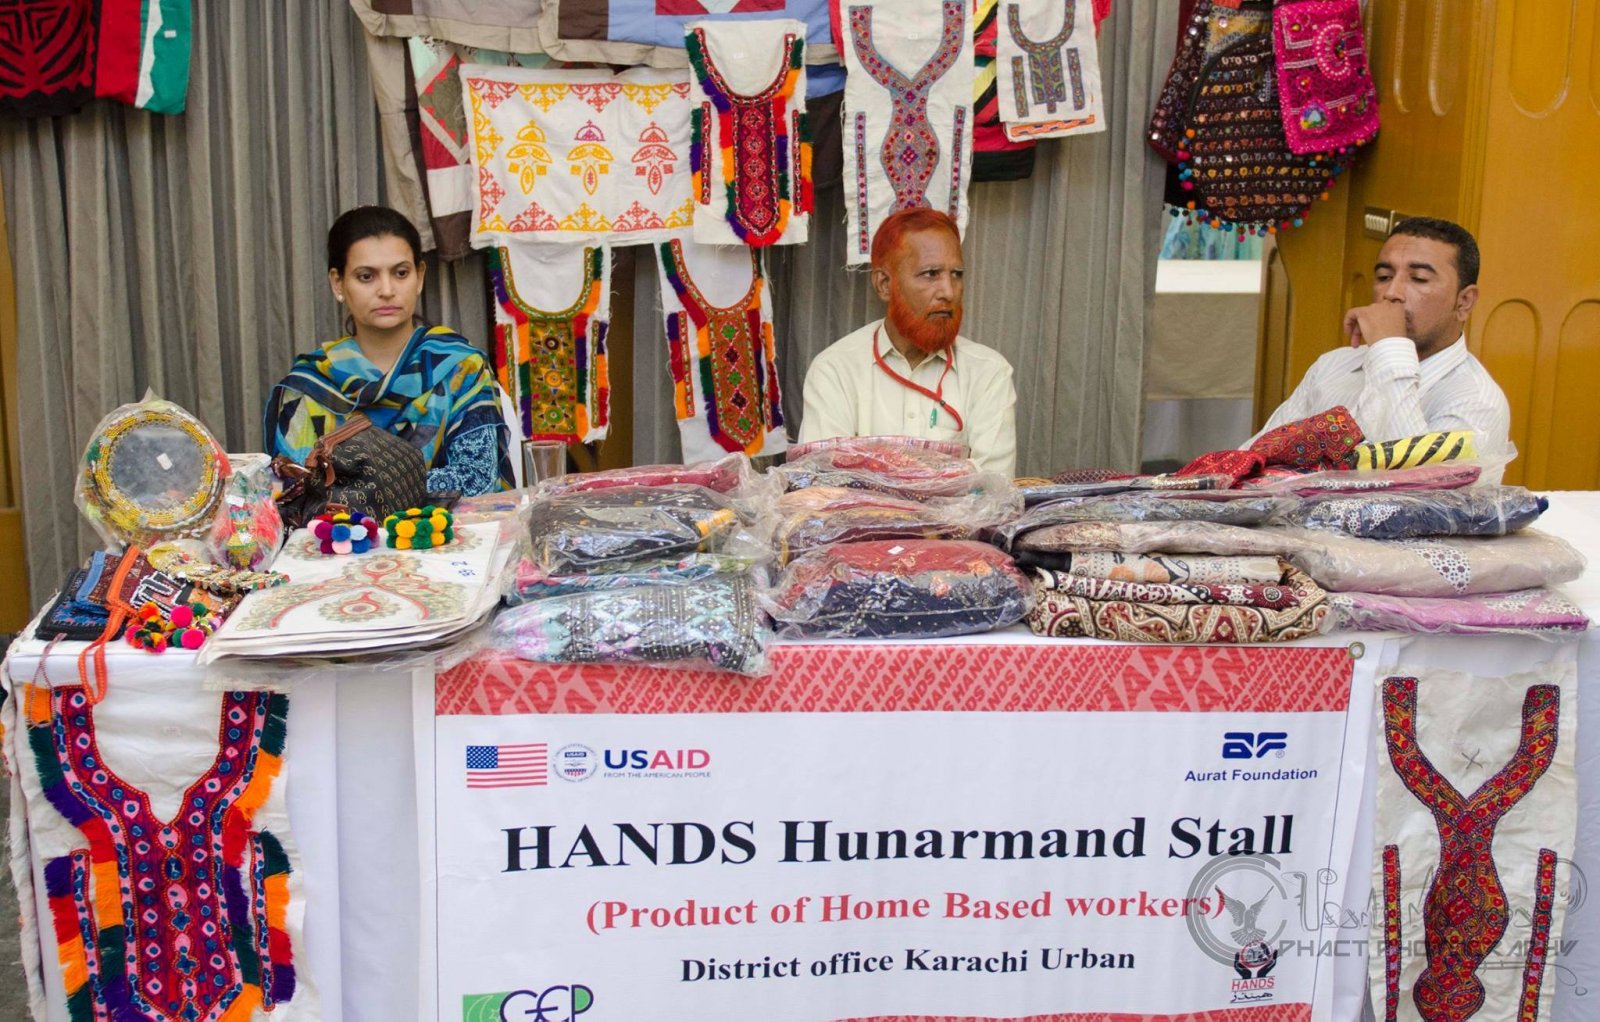 Women artisans from less developed areas of the province participated in the exhibition